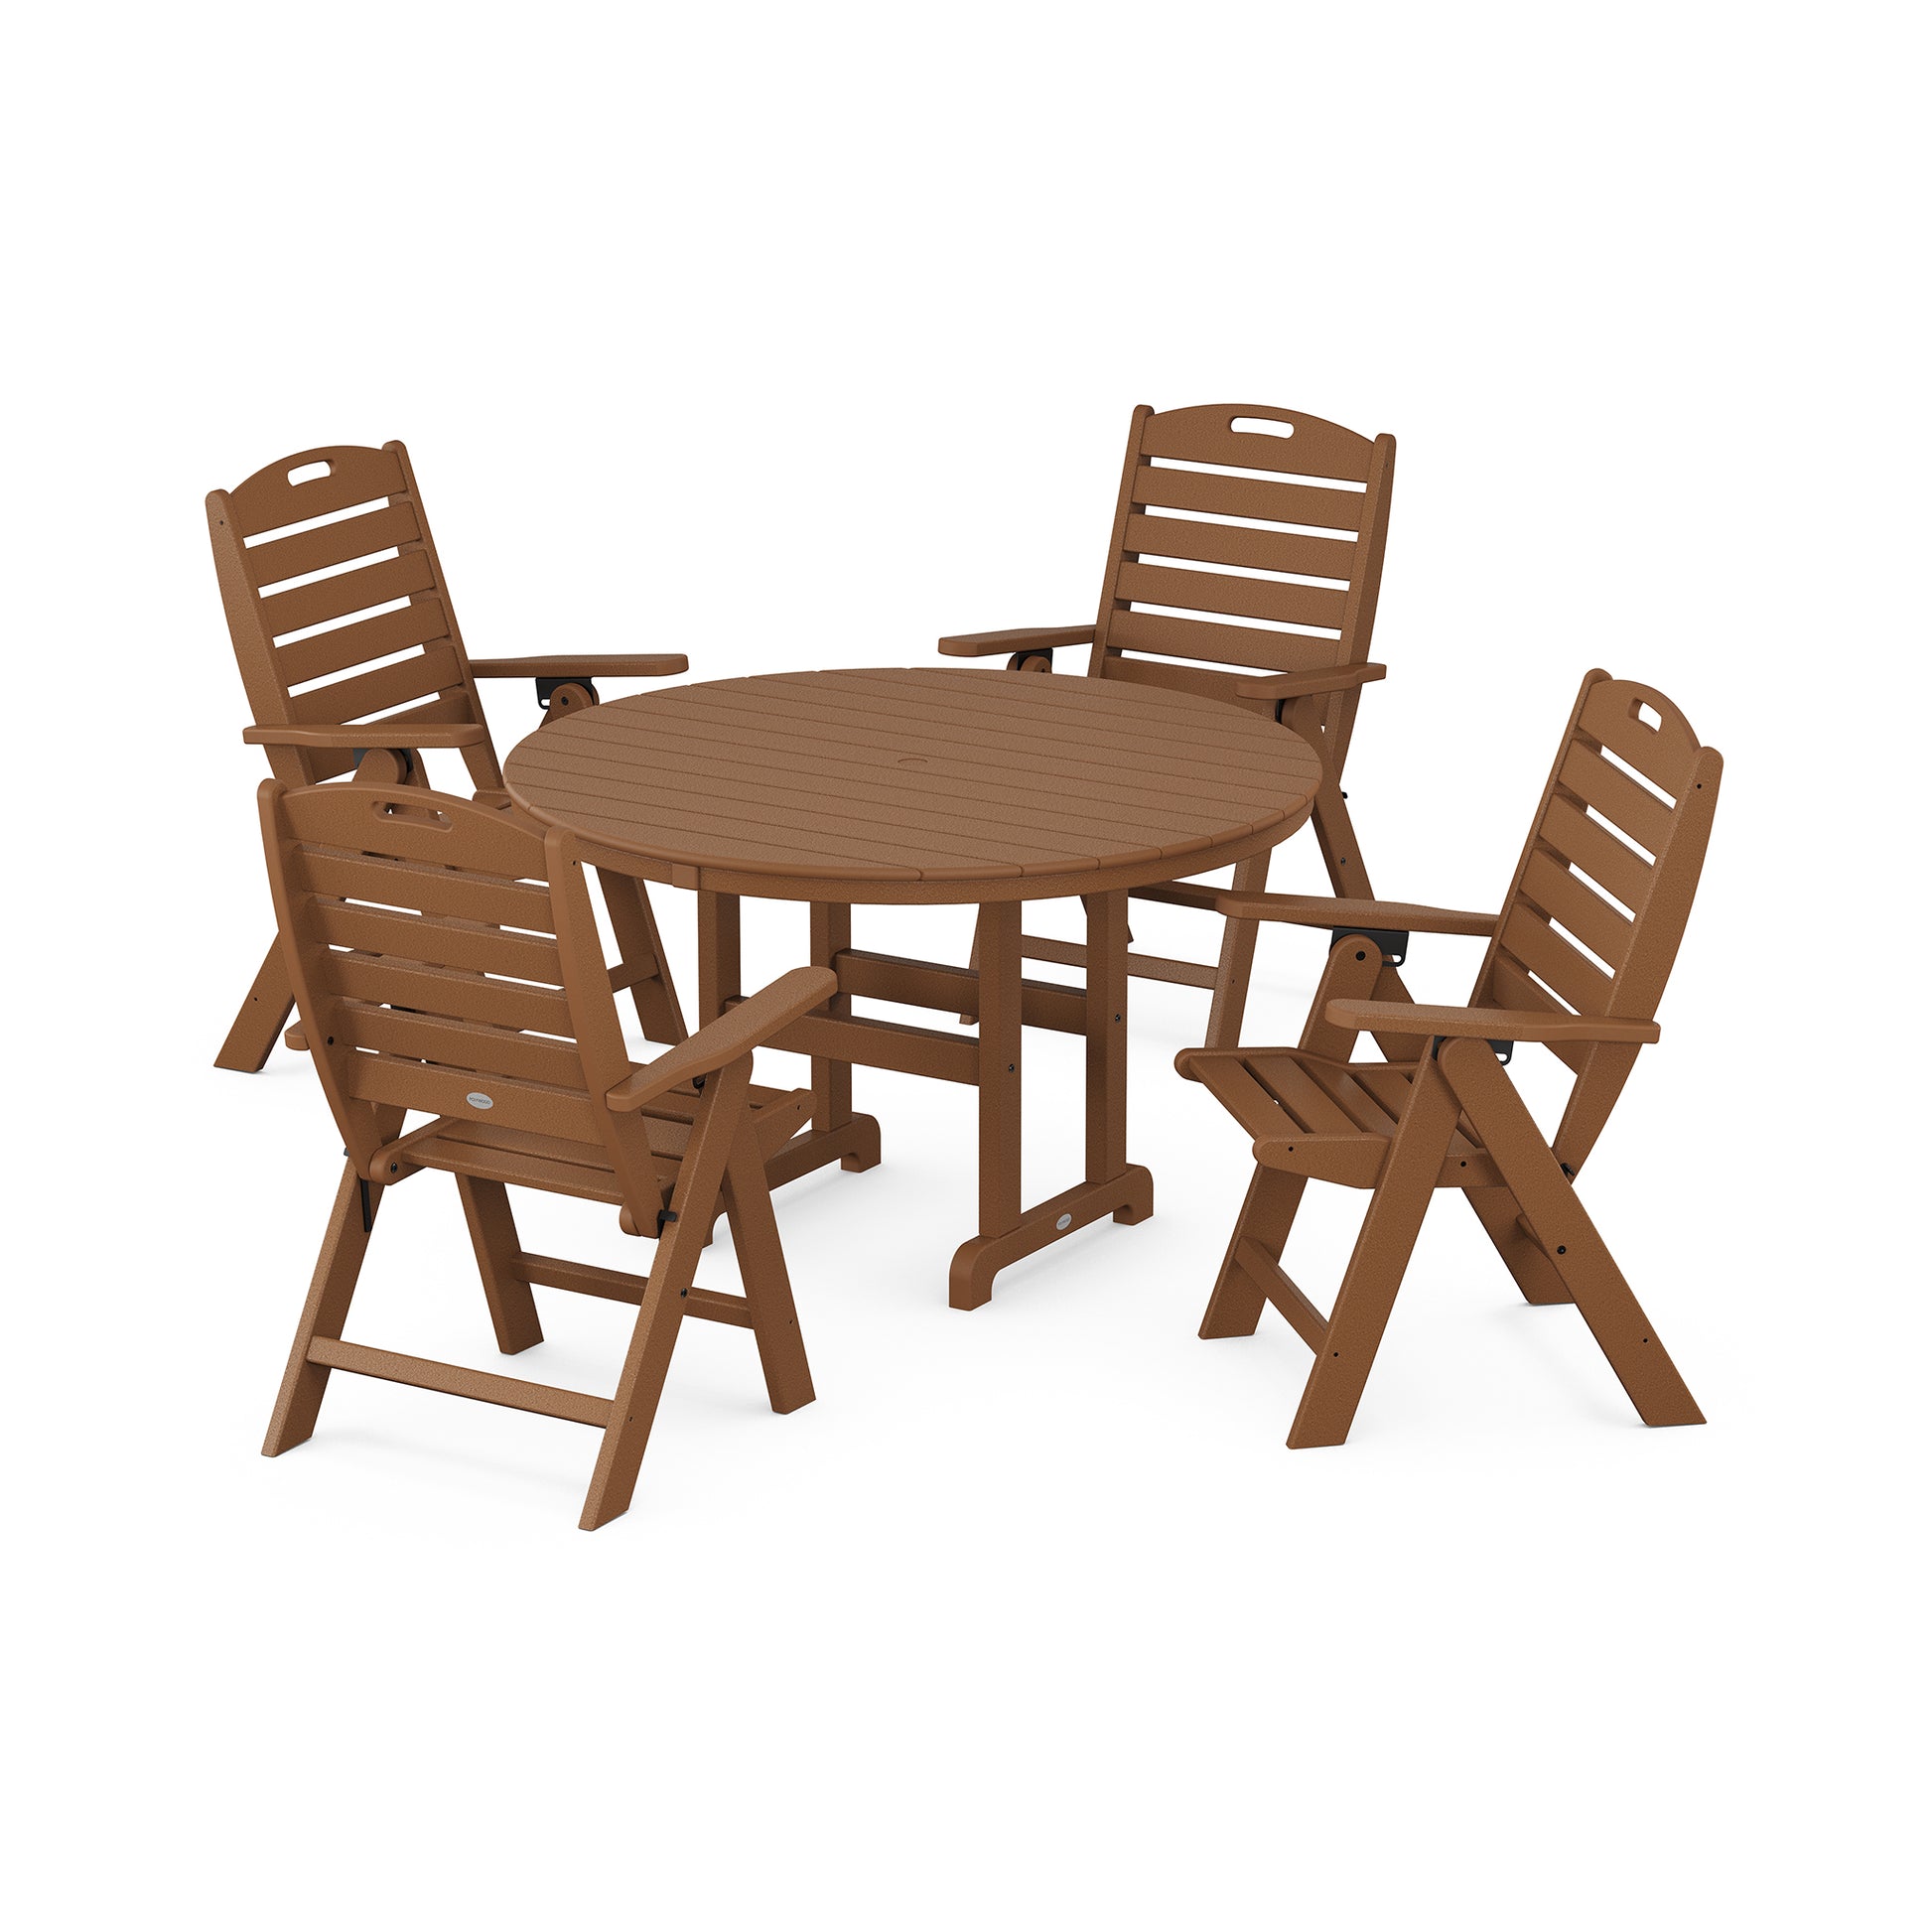 A brown, round POLYWOOD Nautical 5-Piece Dining Set consisting of a table and four folding chairs made by POLYWOOD, set against a white background. The chairs are slightly tilted towards the table.